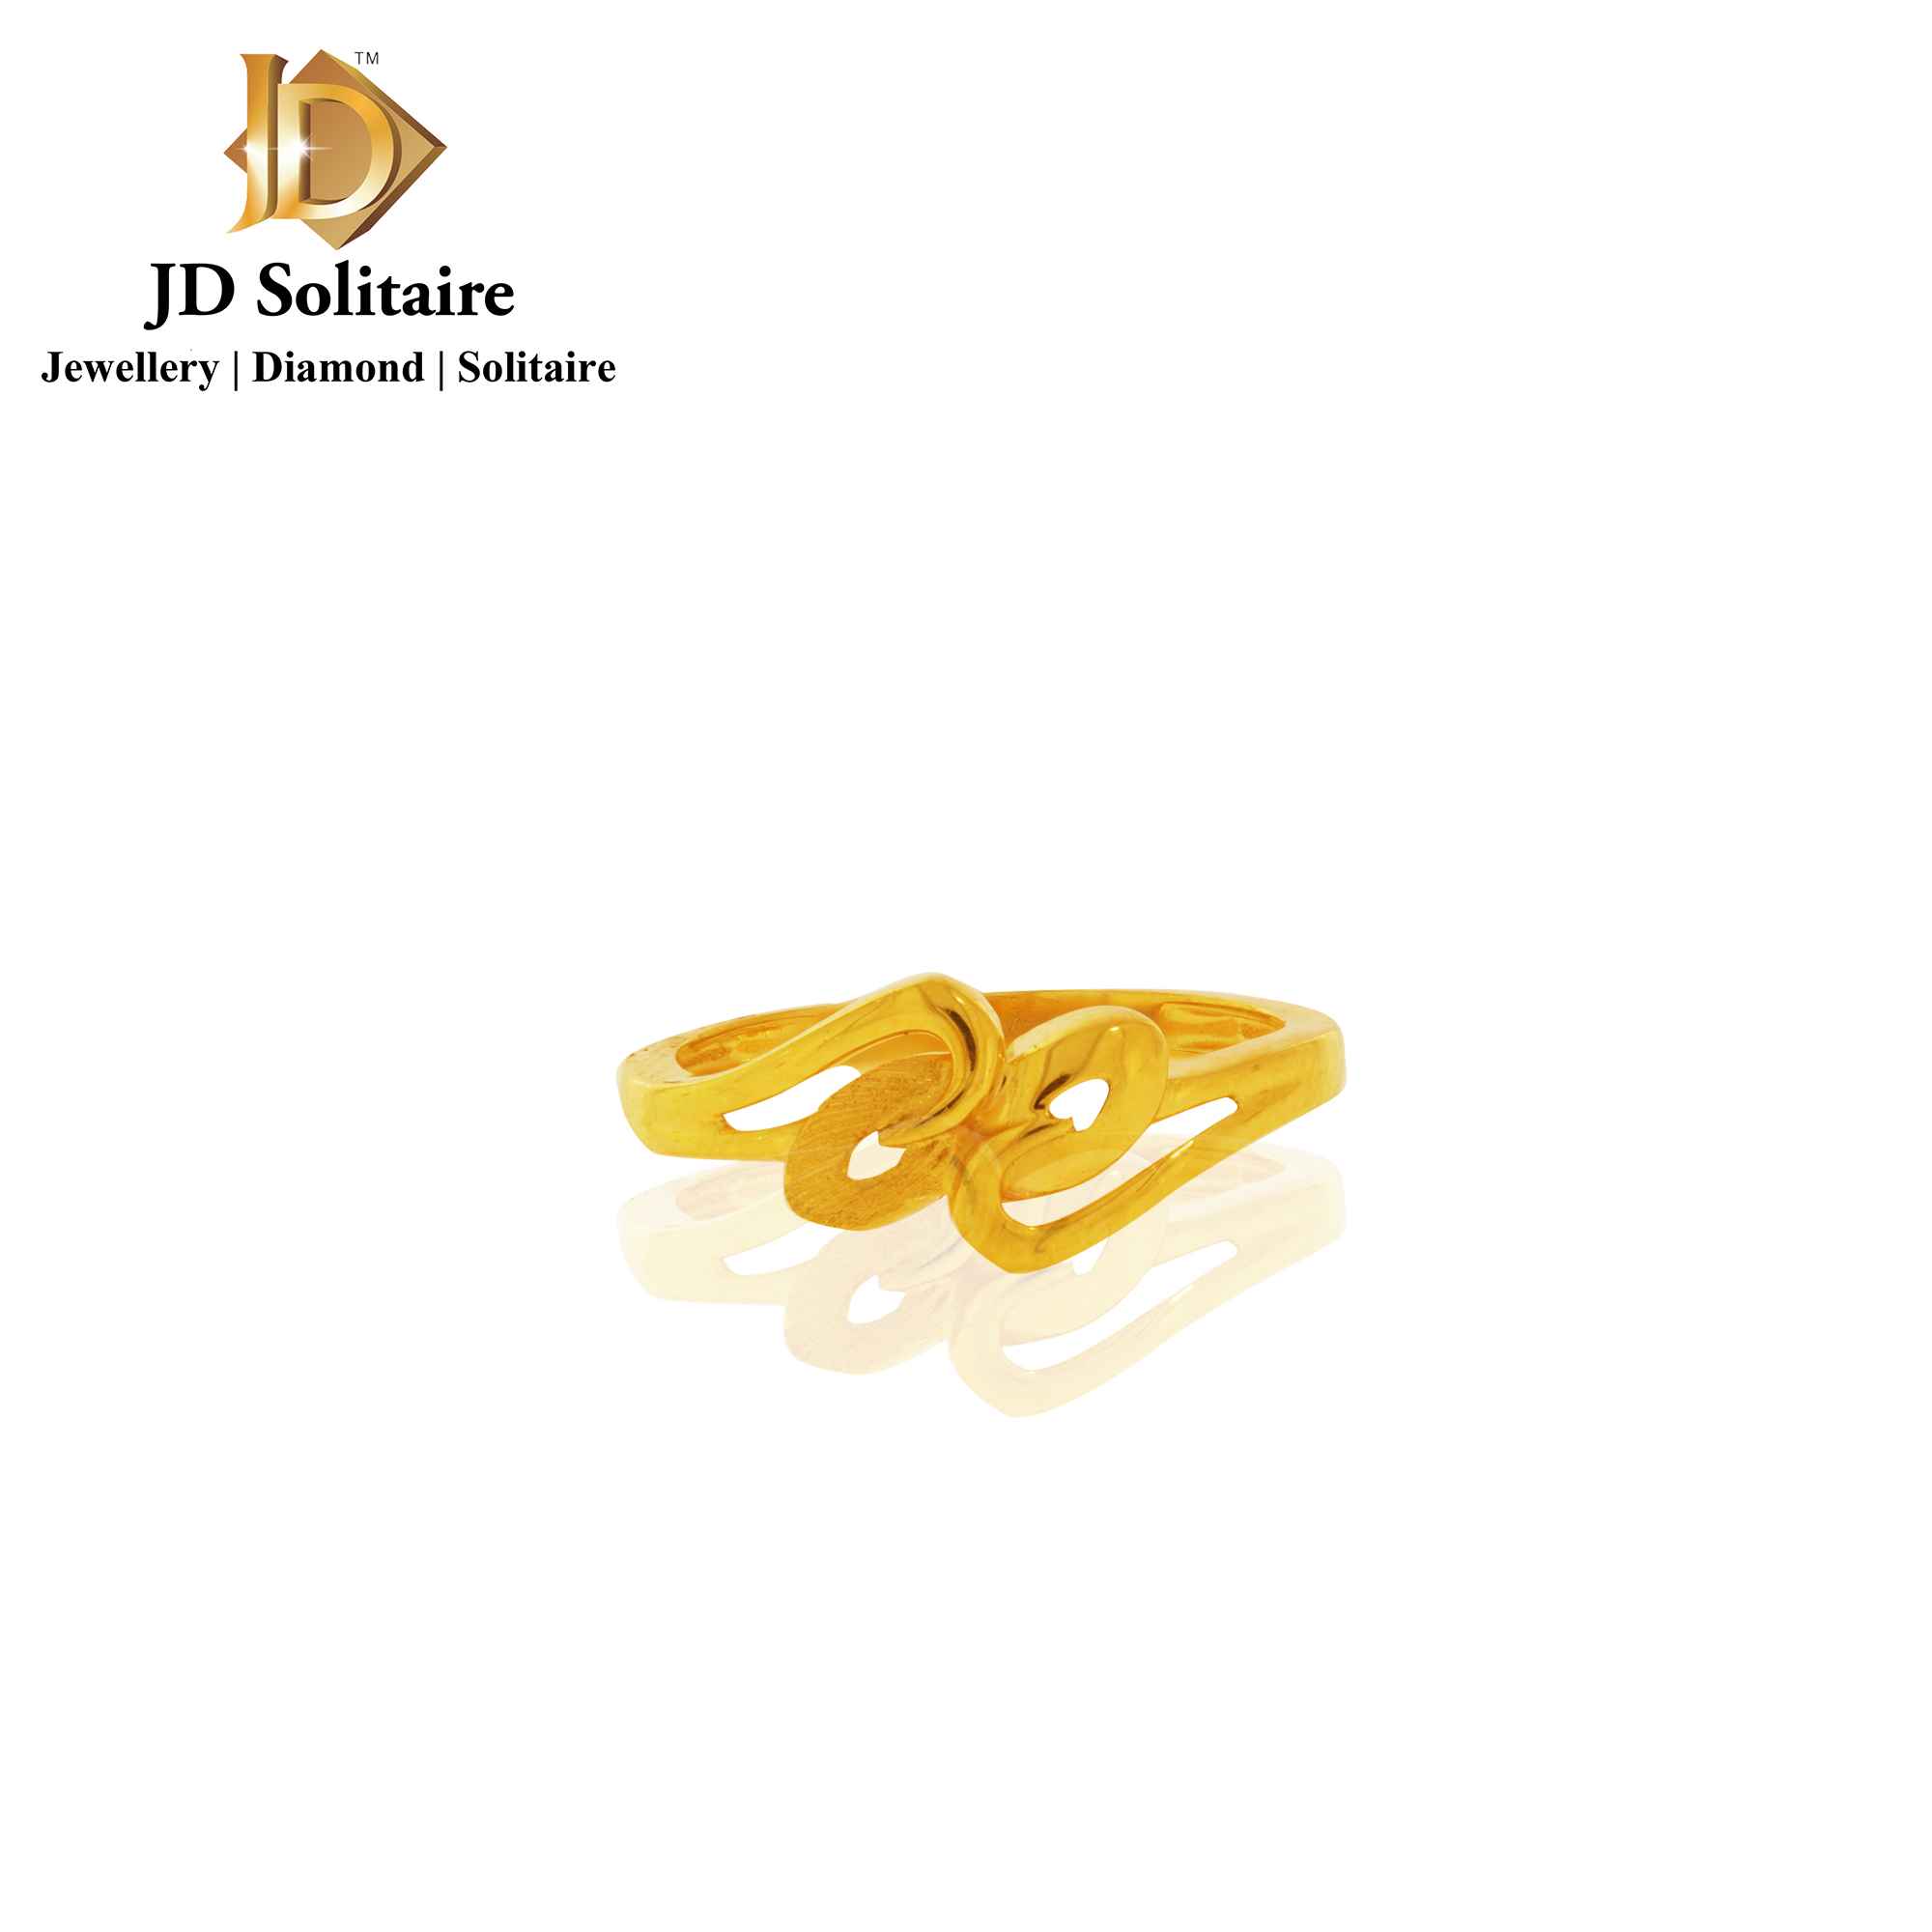 Newest Light 22k Gold Ring Designs with Weight and Tag | Gold ring designs,  Latest gold ring designs, Ring designs